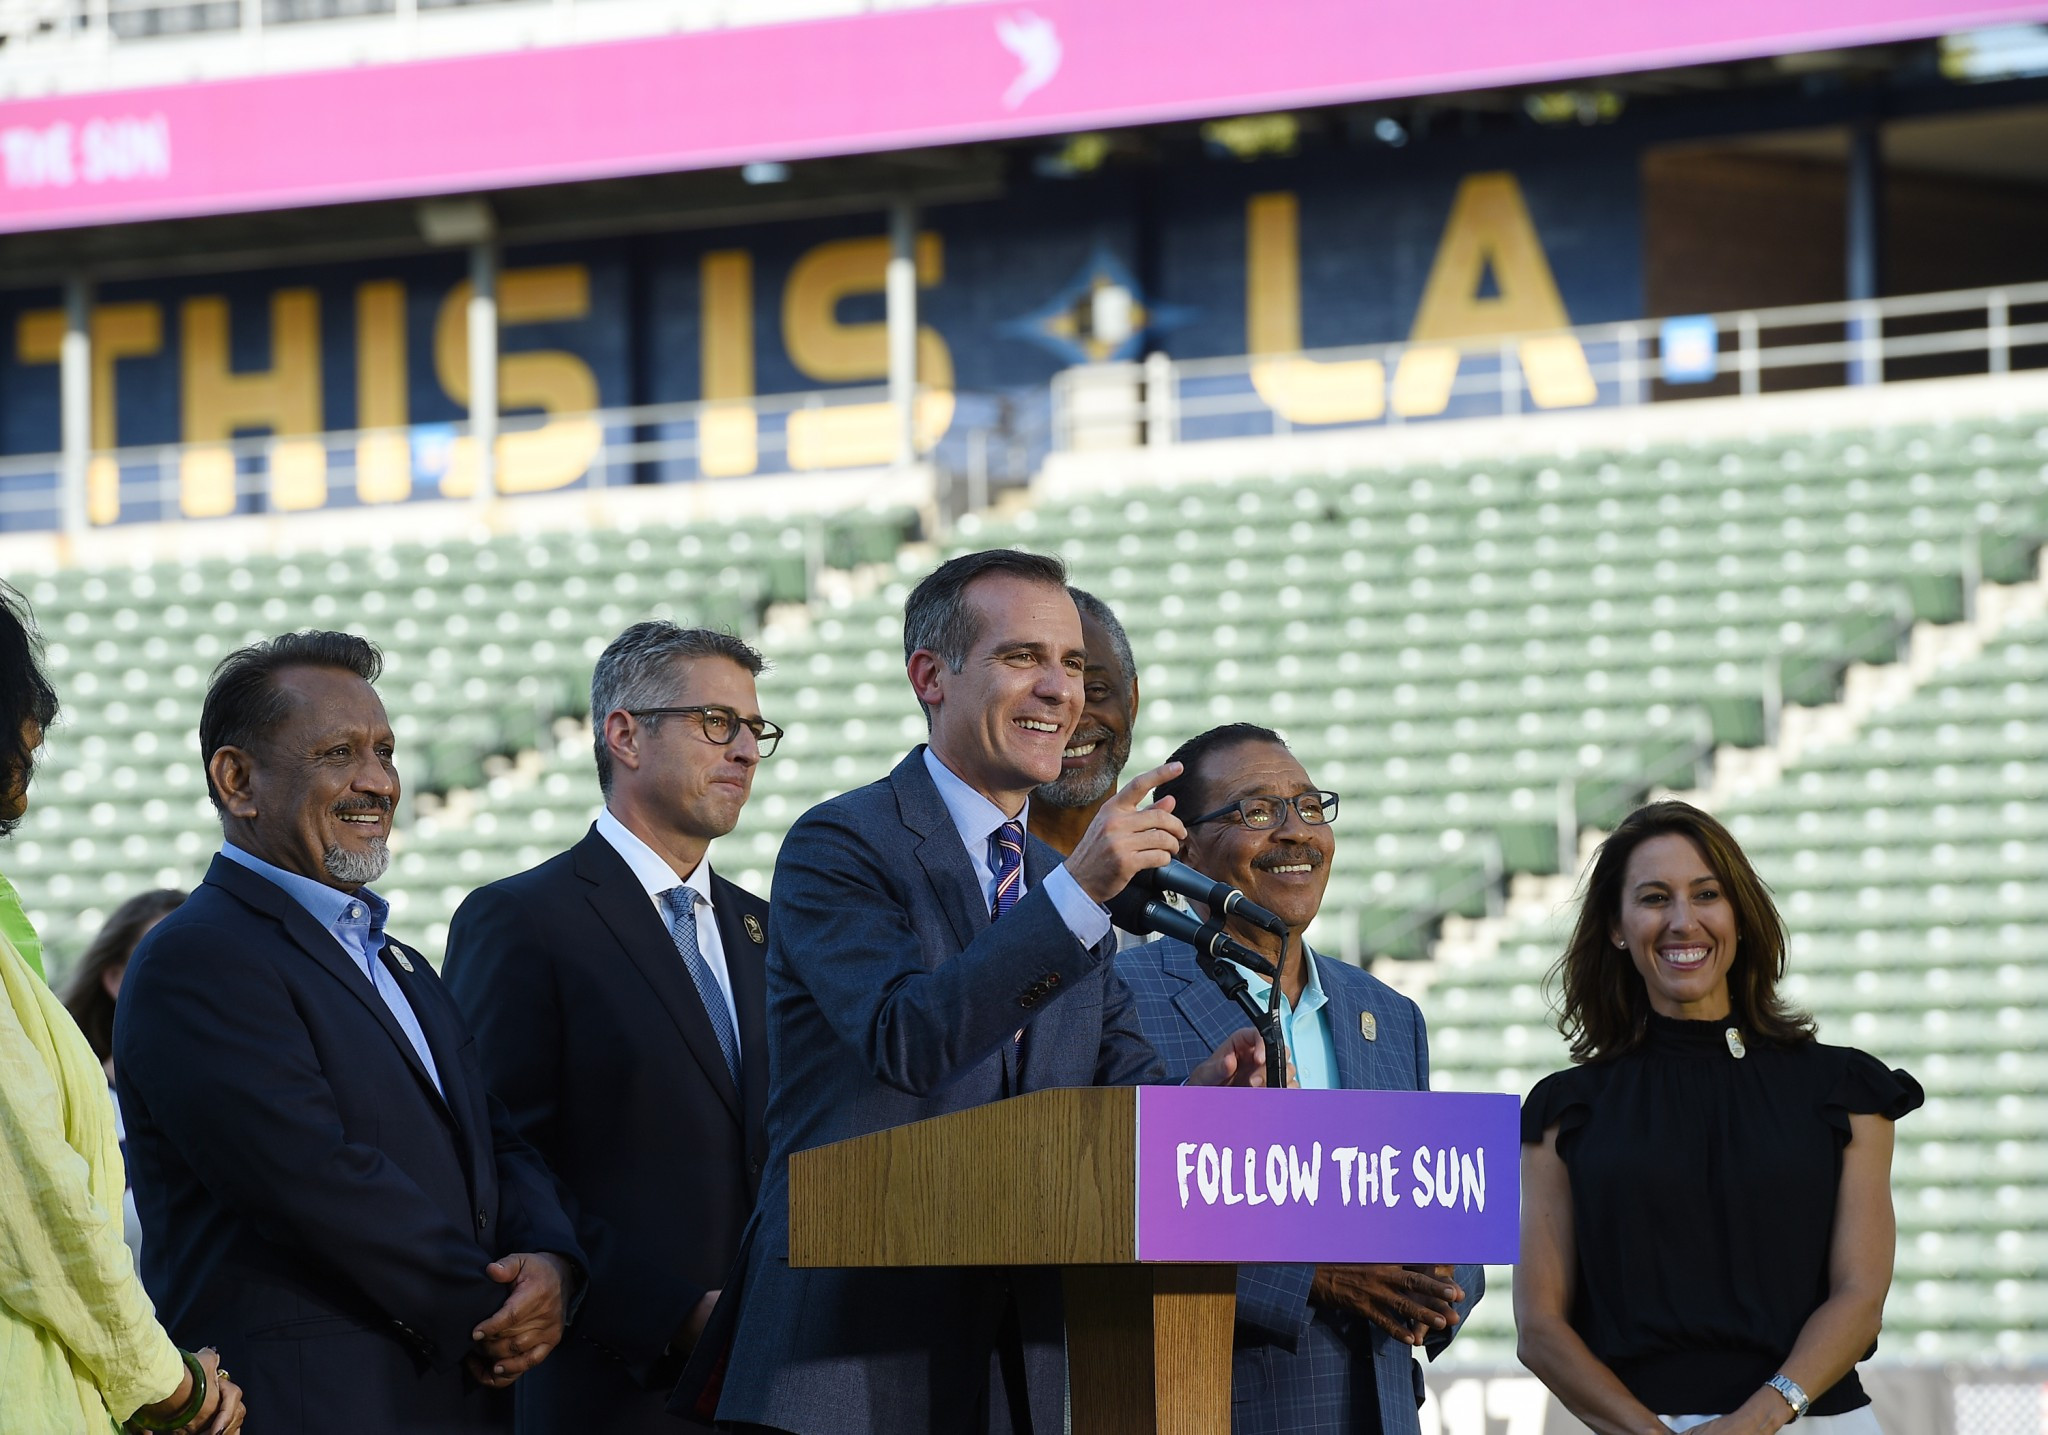 Los Angeles 2028 calls for public support at key council meeting